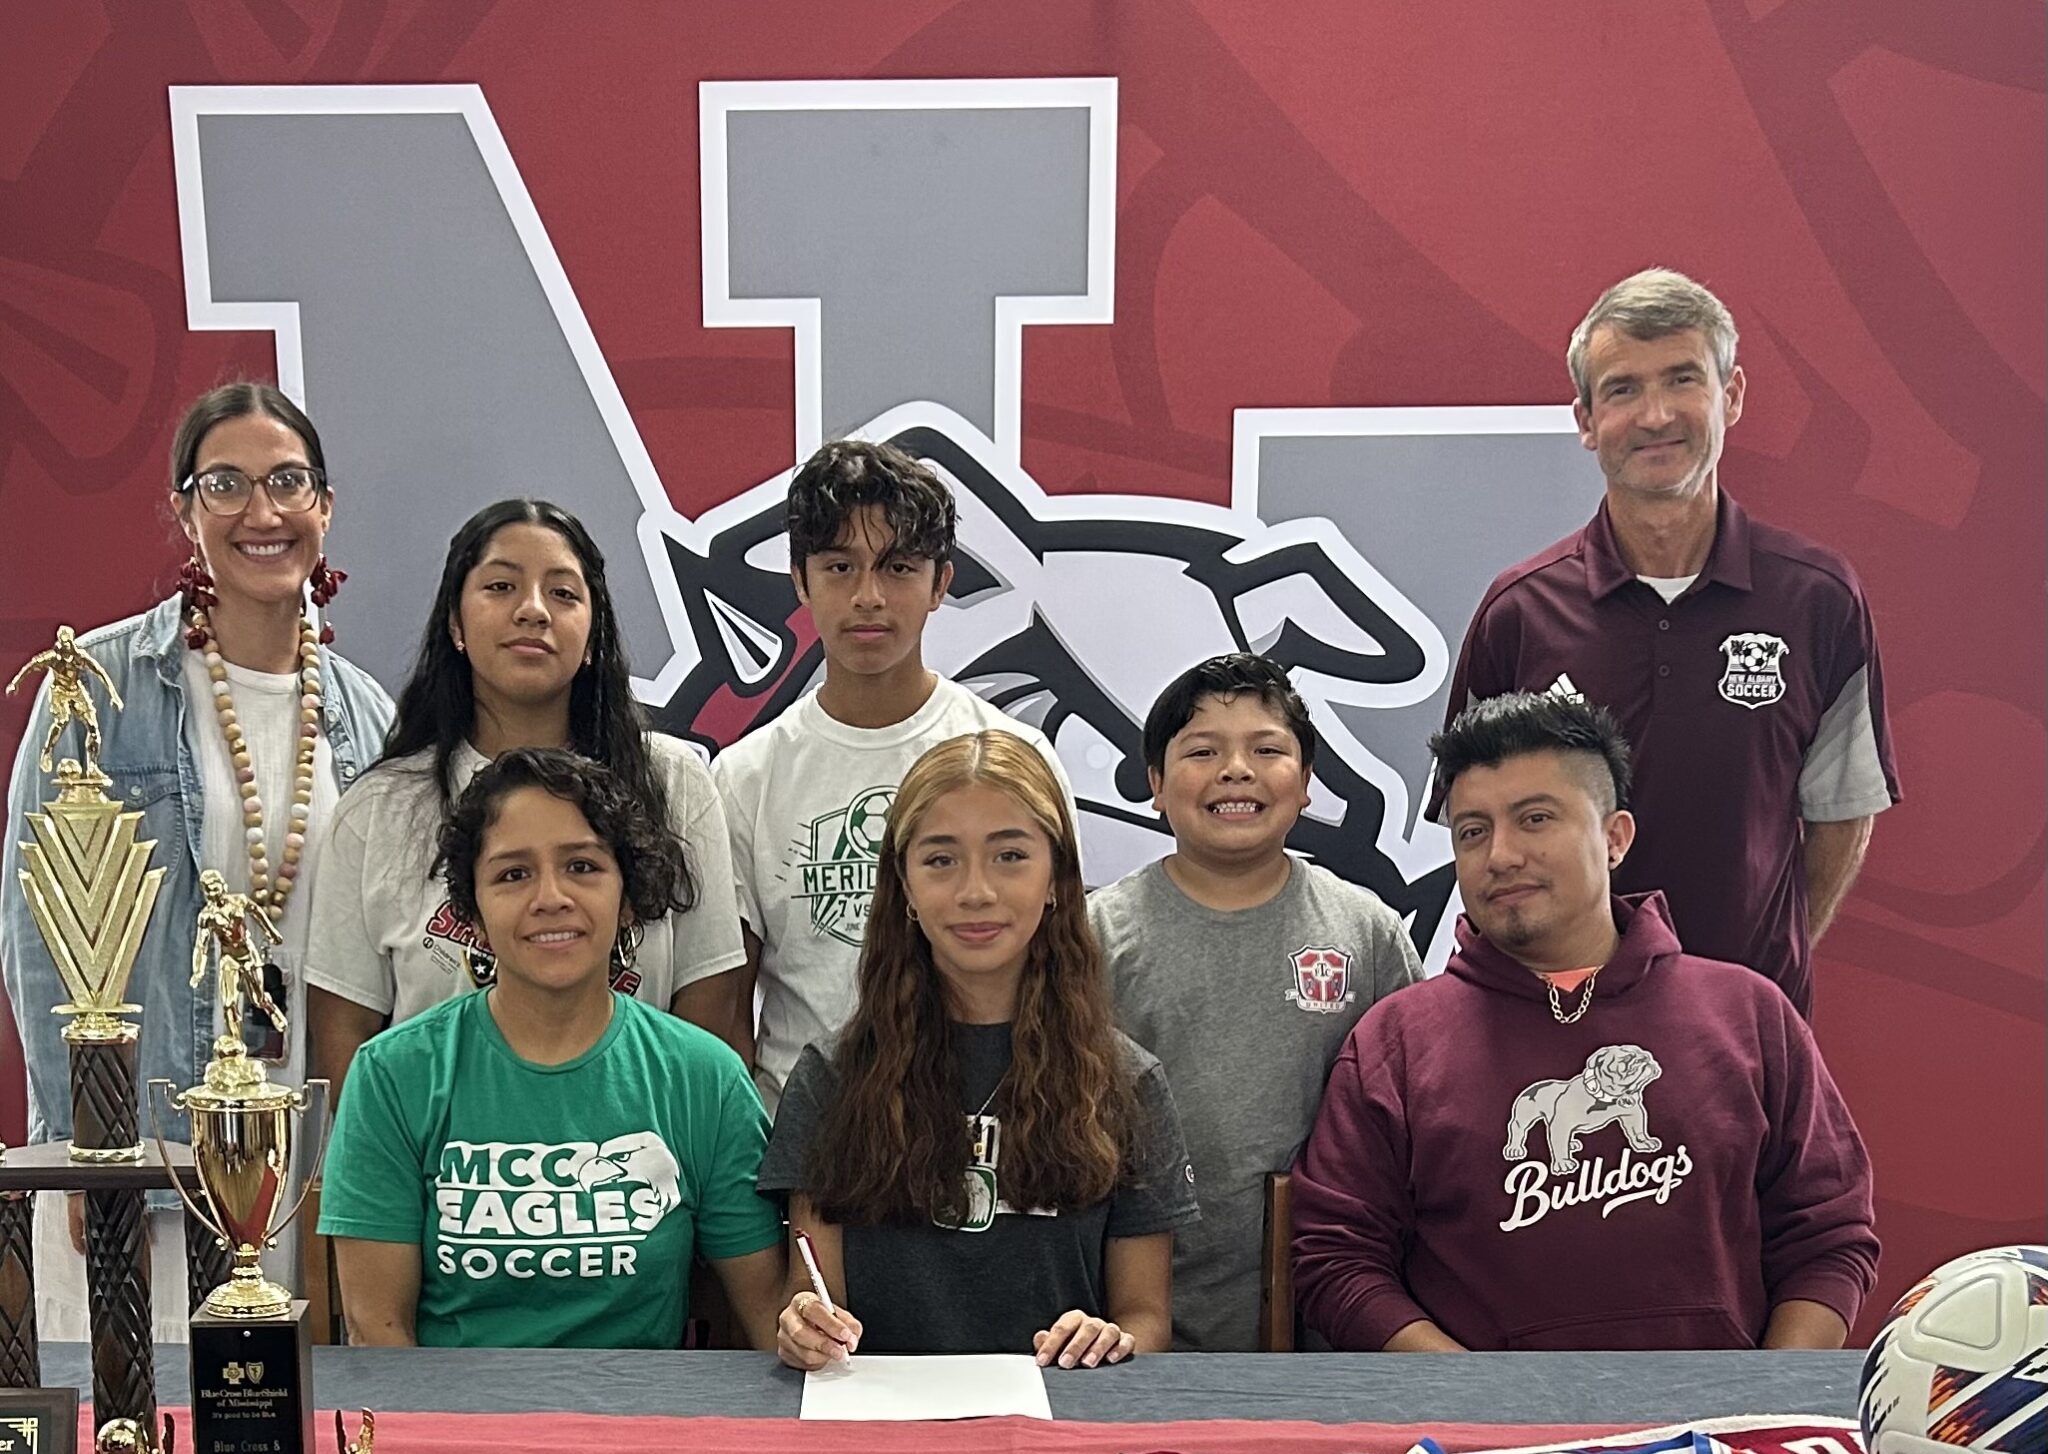 On Wednesday, November 8, New Albany Lady Bulldog Soccer's Ingrid Ojeda signed to play soccer with Meridian Community College. Pictured are front row l-r: Raquel Rodriguez, Ingrid Ojeda, Ethan Ojeda, Ivan Ojeda; back row l-r: NAHS Assistant Coach Katelyn Robbins, Anette Ojeda, Iker Ojeda, and NAHS Head Coach Bert Anderson.